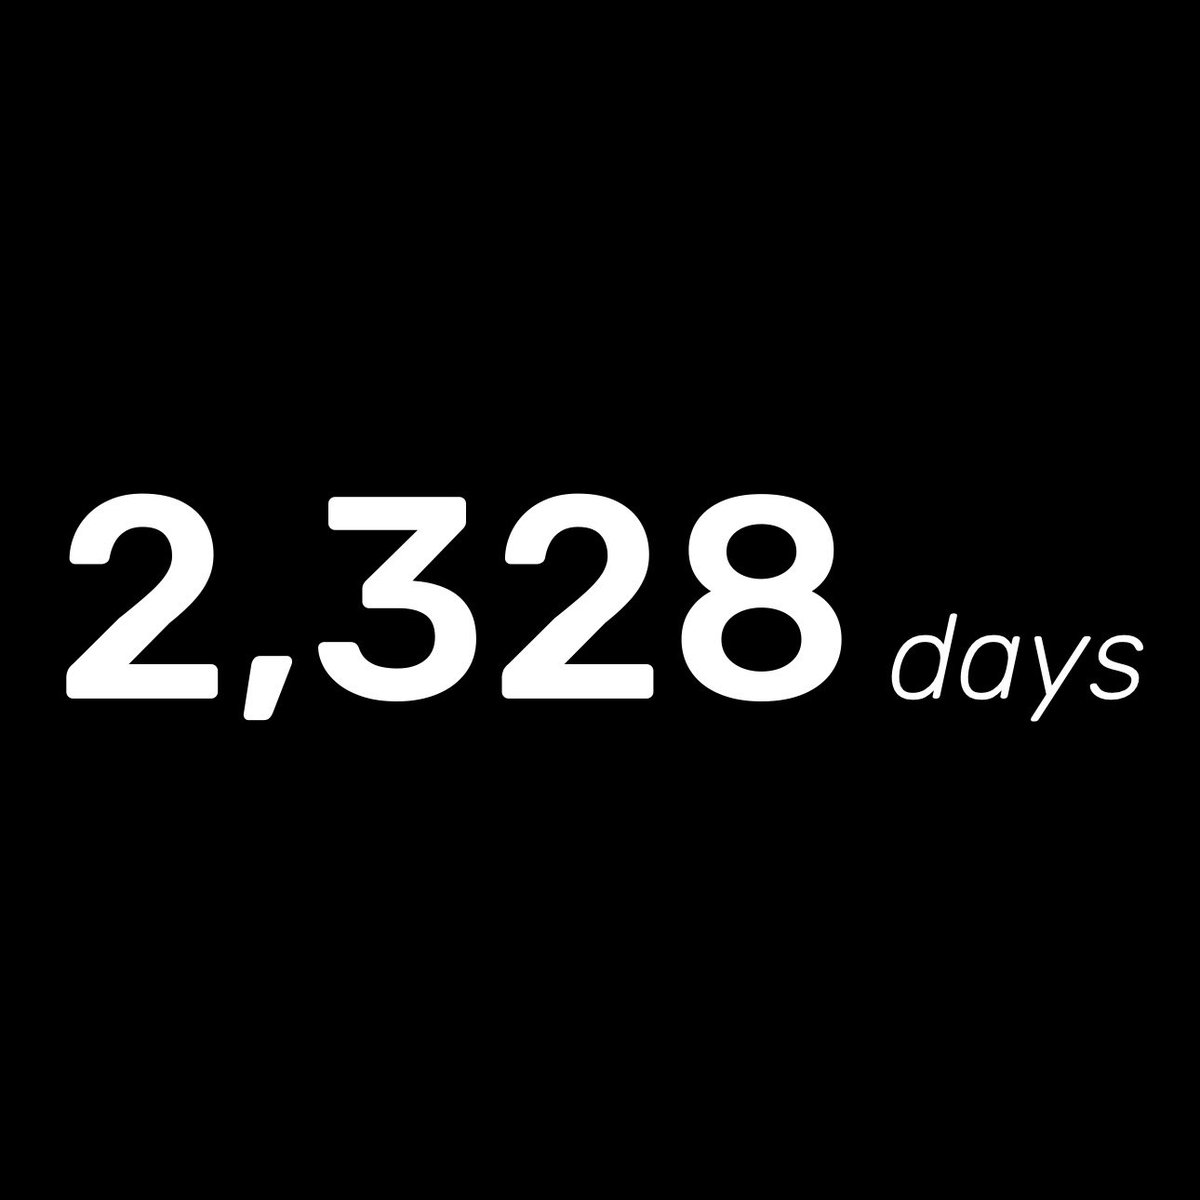 How many days has Colin Kaepernick been denied work in the NFL? We’re counting. https://t.co/H3vJlOMcPq https://t.co/REdKsVpRSk